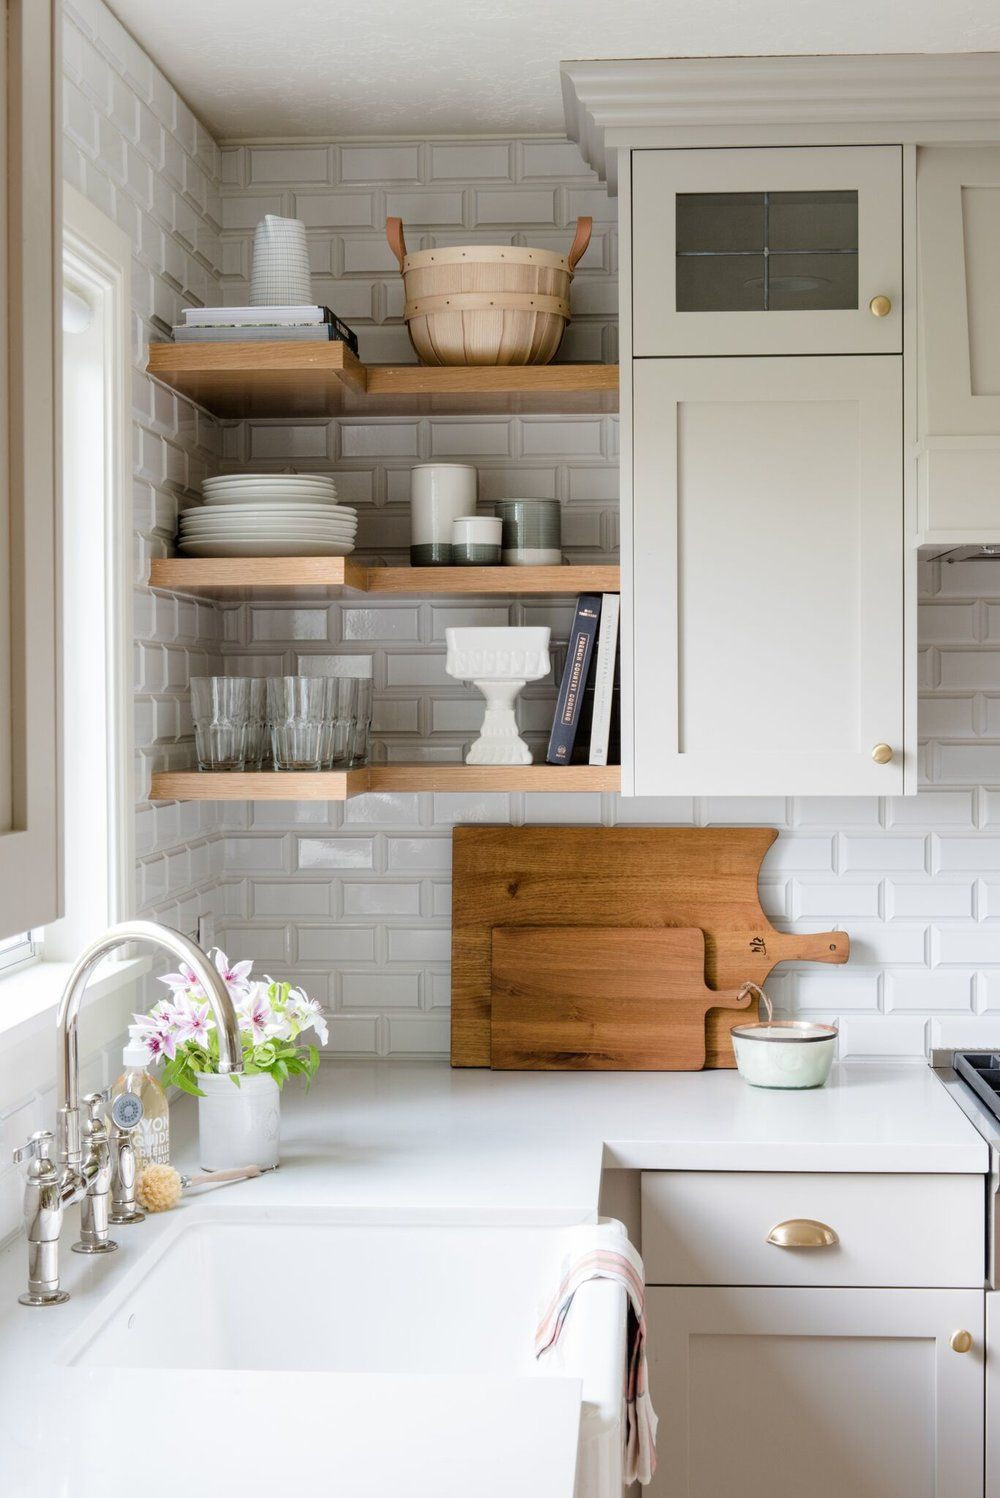 Small Kitchen Open Shelving
 Evergreen Kitchen Remodel Reveal